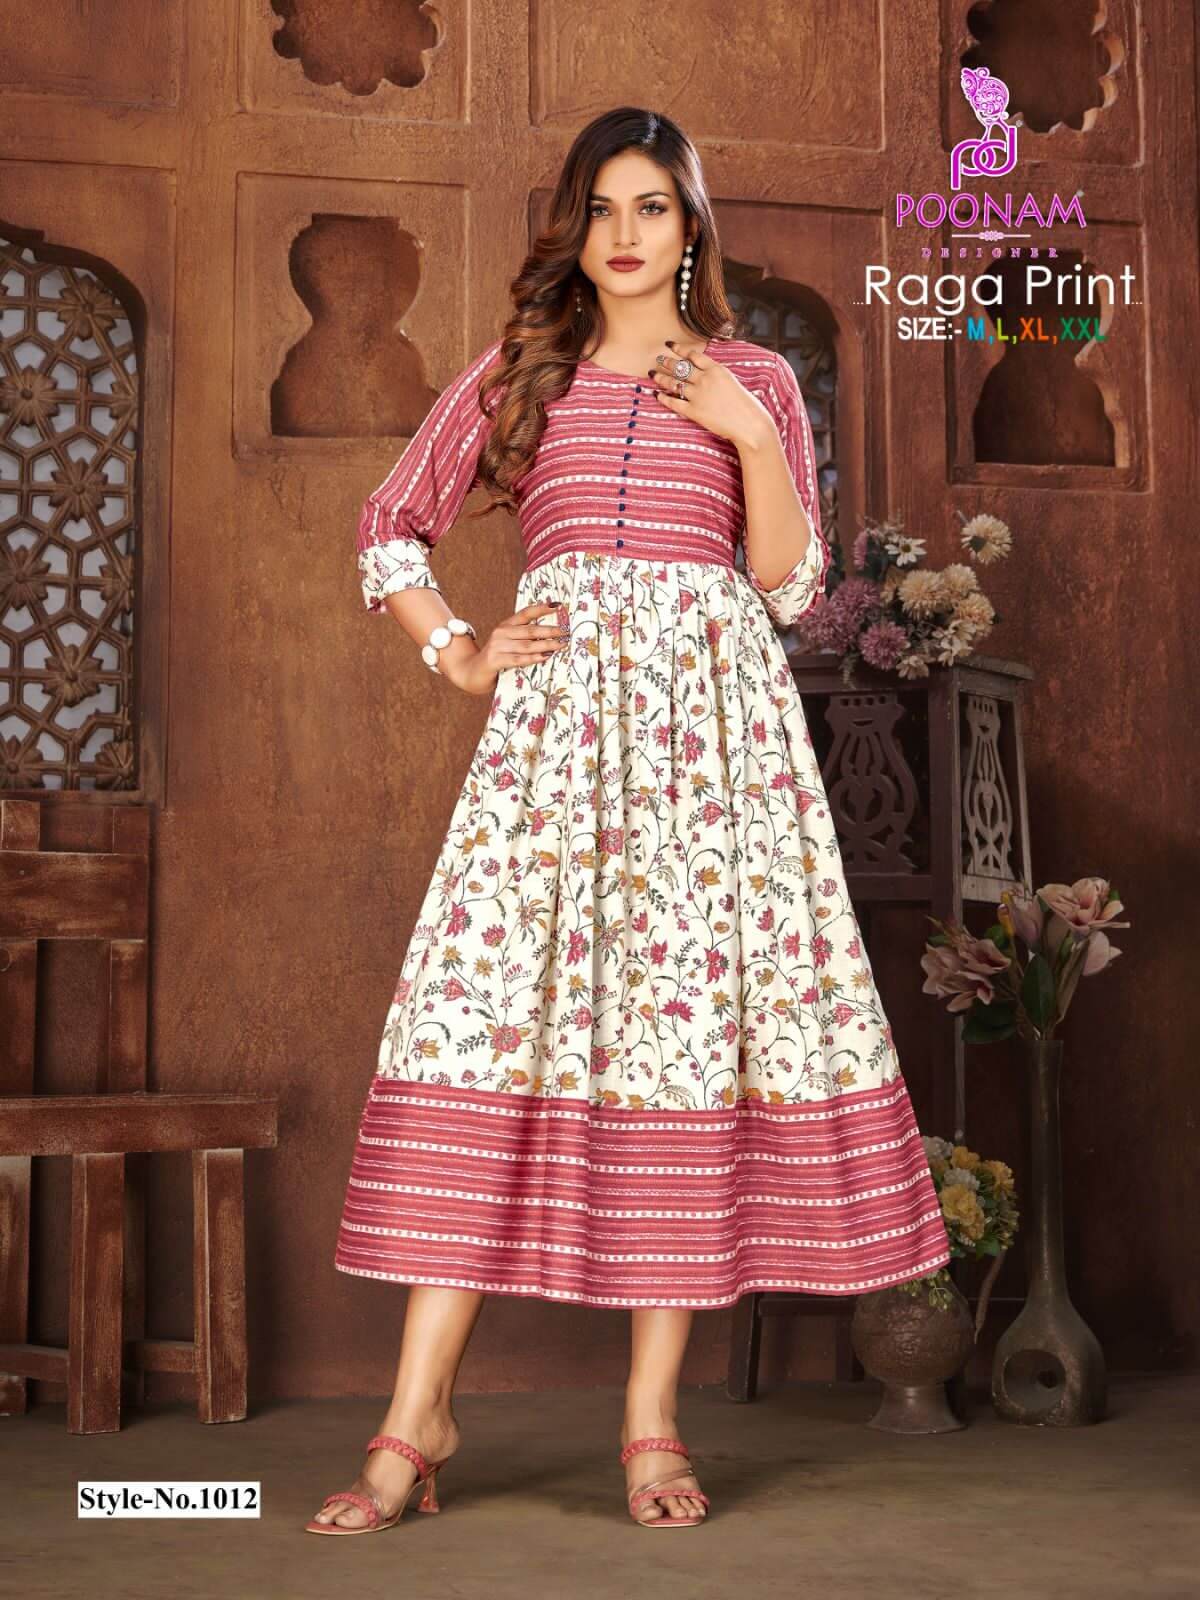 Poonam Raga Print Gowns Catalog collection 10